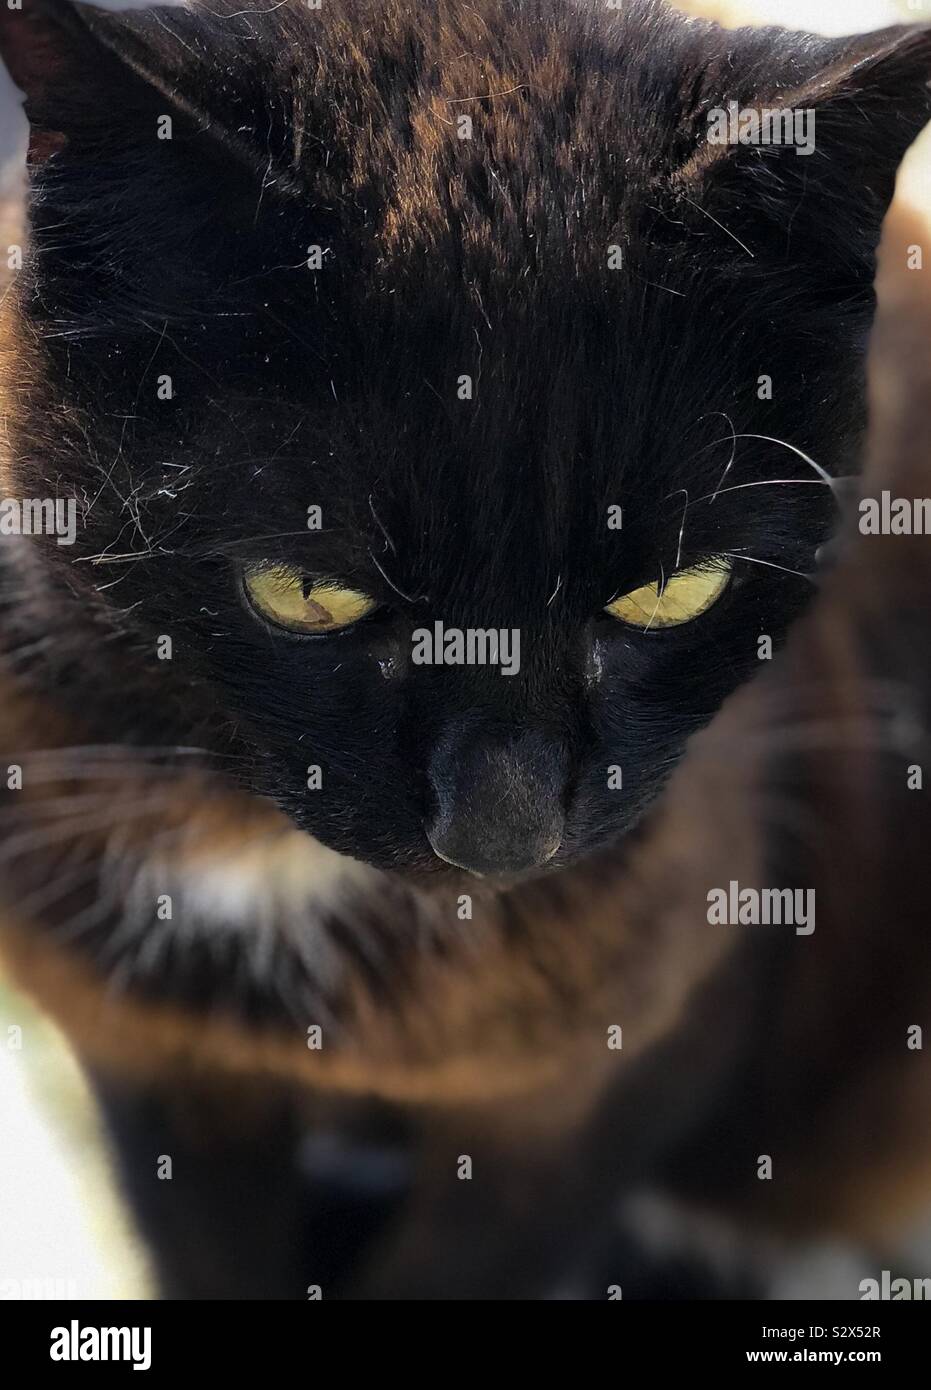 A black-brownish cat with yellow eyes staring melancholy sideways. Stock Photo